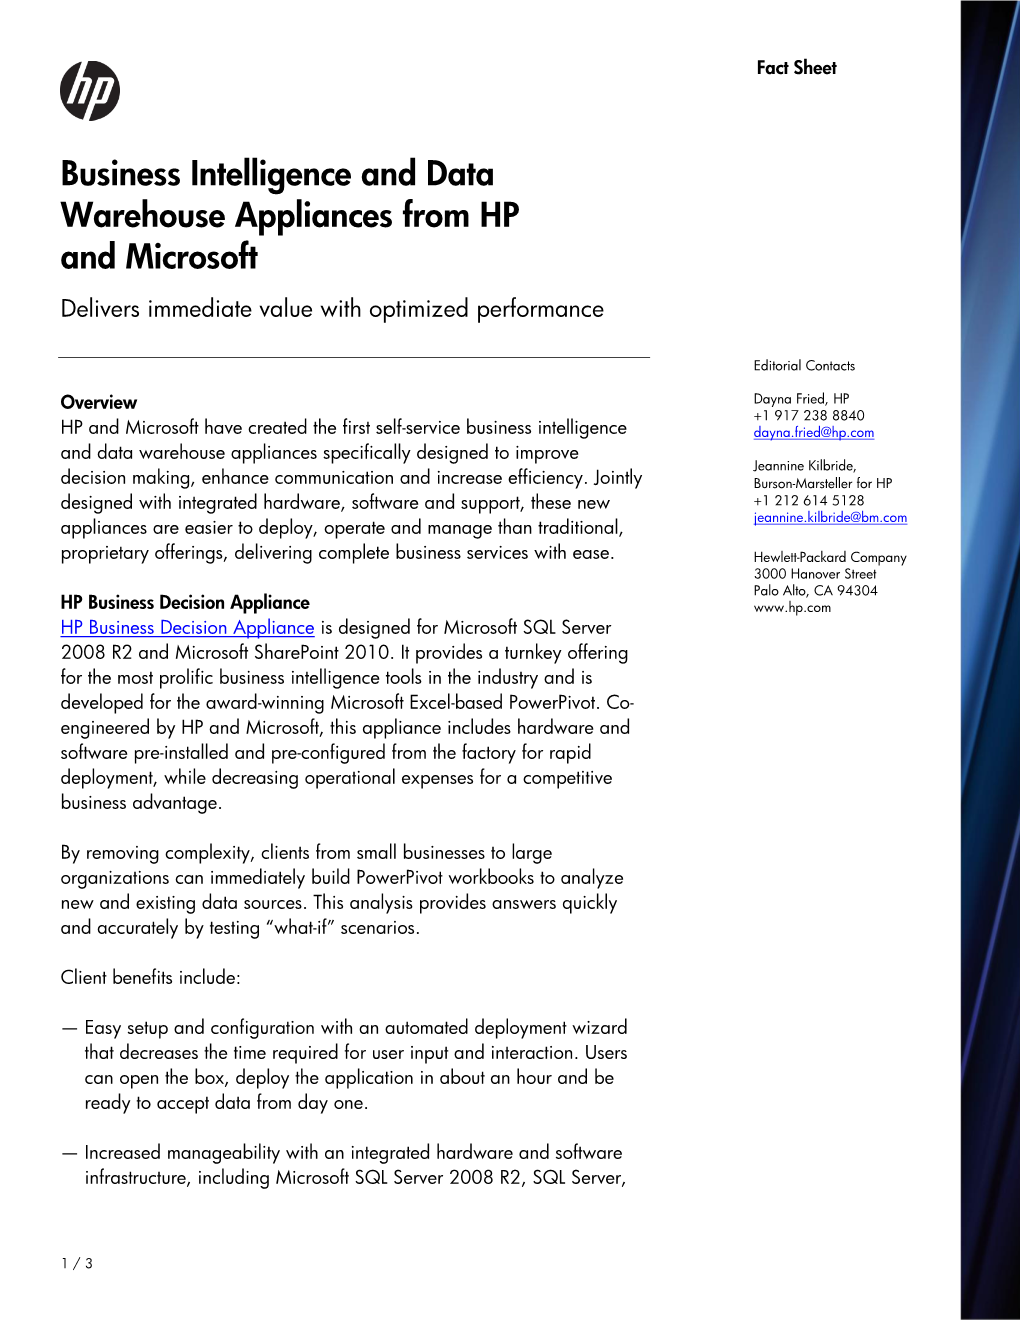 Business Intelligence and Data Warehouse Appliances from HP and Microsoft Delivers Immediate Value with Optimized Performance